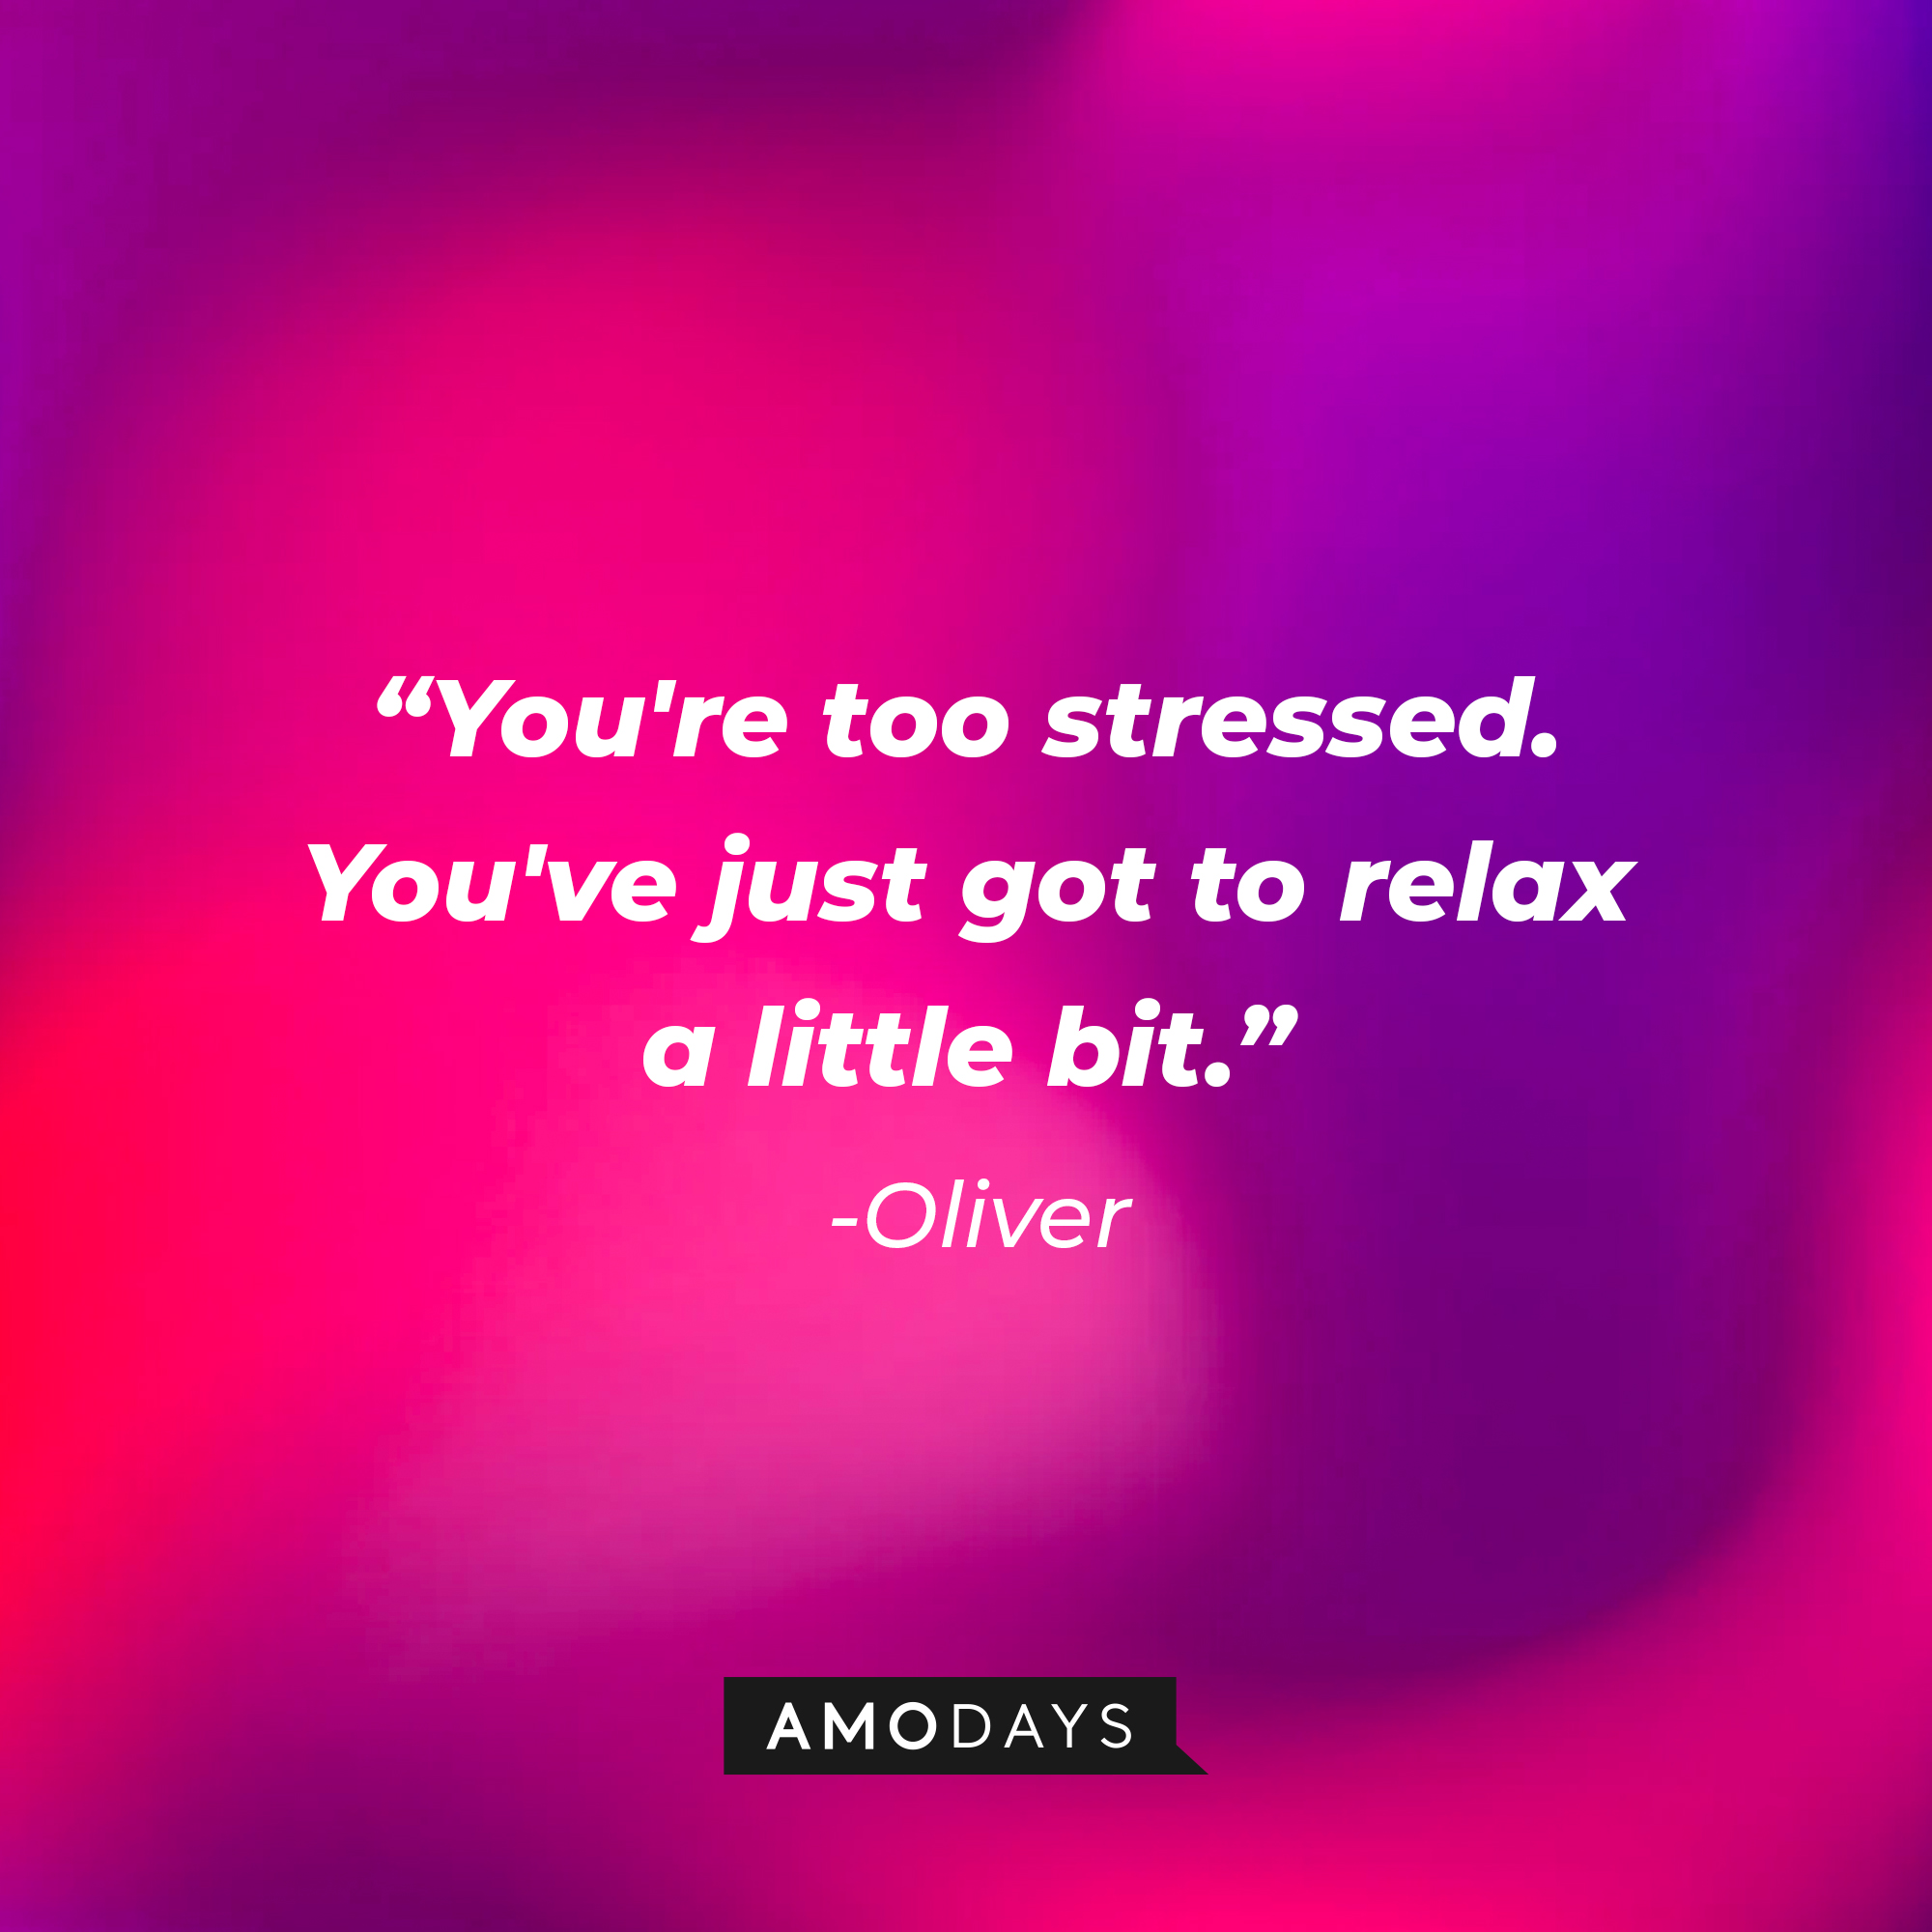 Oliver's quote: "You're too stressed. You've just got to relax a little bit." | Source: AmoDays